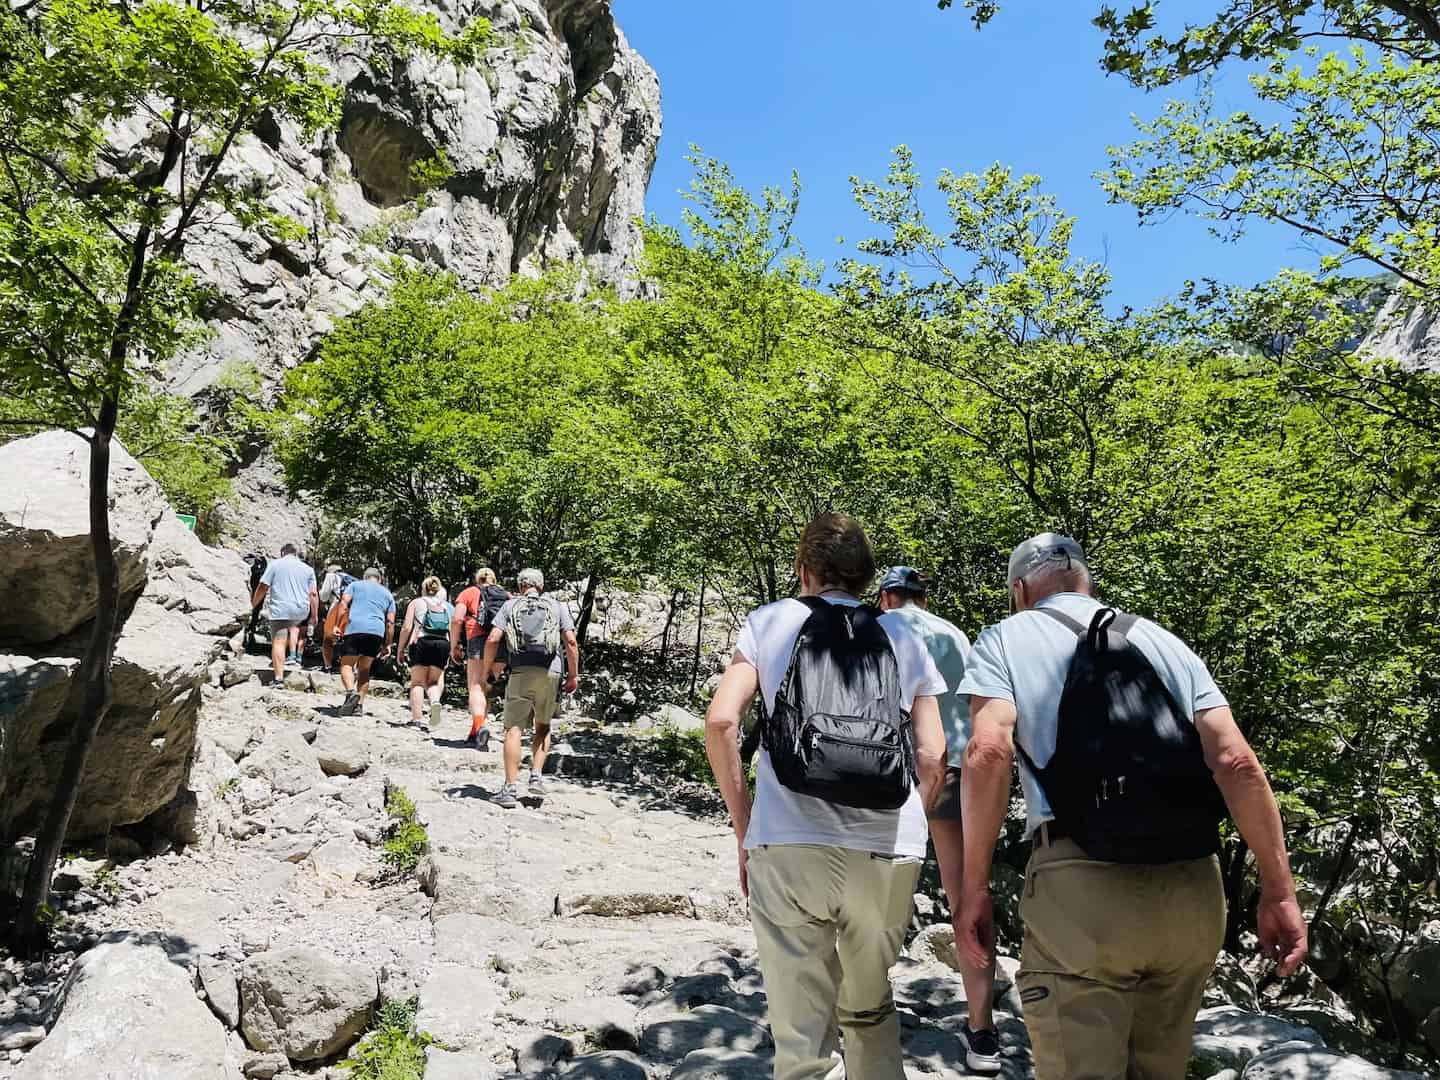 On a Viking ocean cruise excursion, people hike up a rocky path at Paklenica National Park in Croatia.